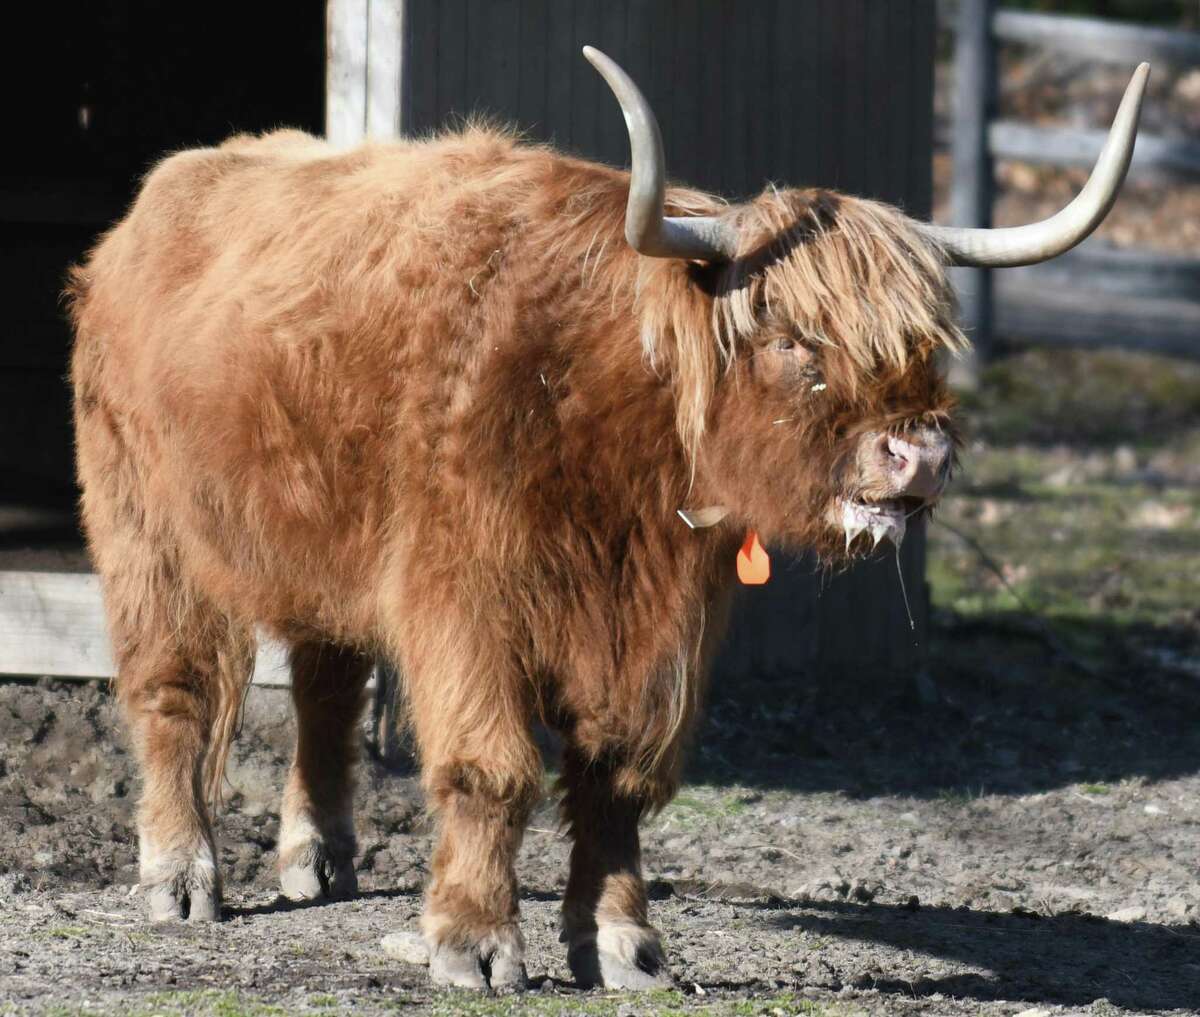 A highland cow slobbers outside its stable at the Stamford Museum & Nature Center in Stamford, Conn. Sunday, Jan. 10, 2021.